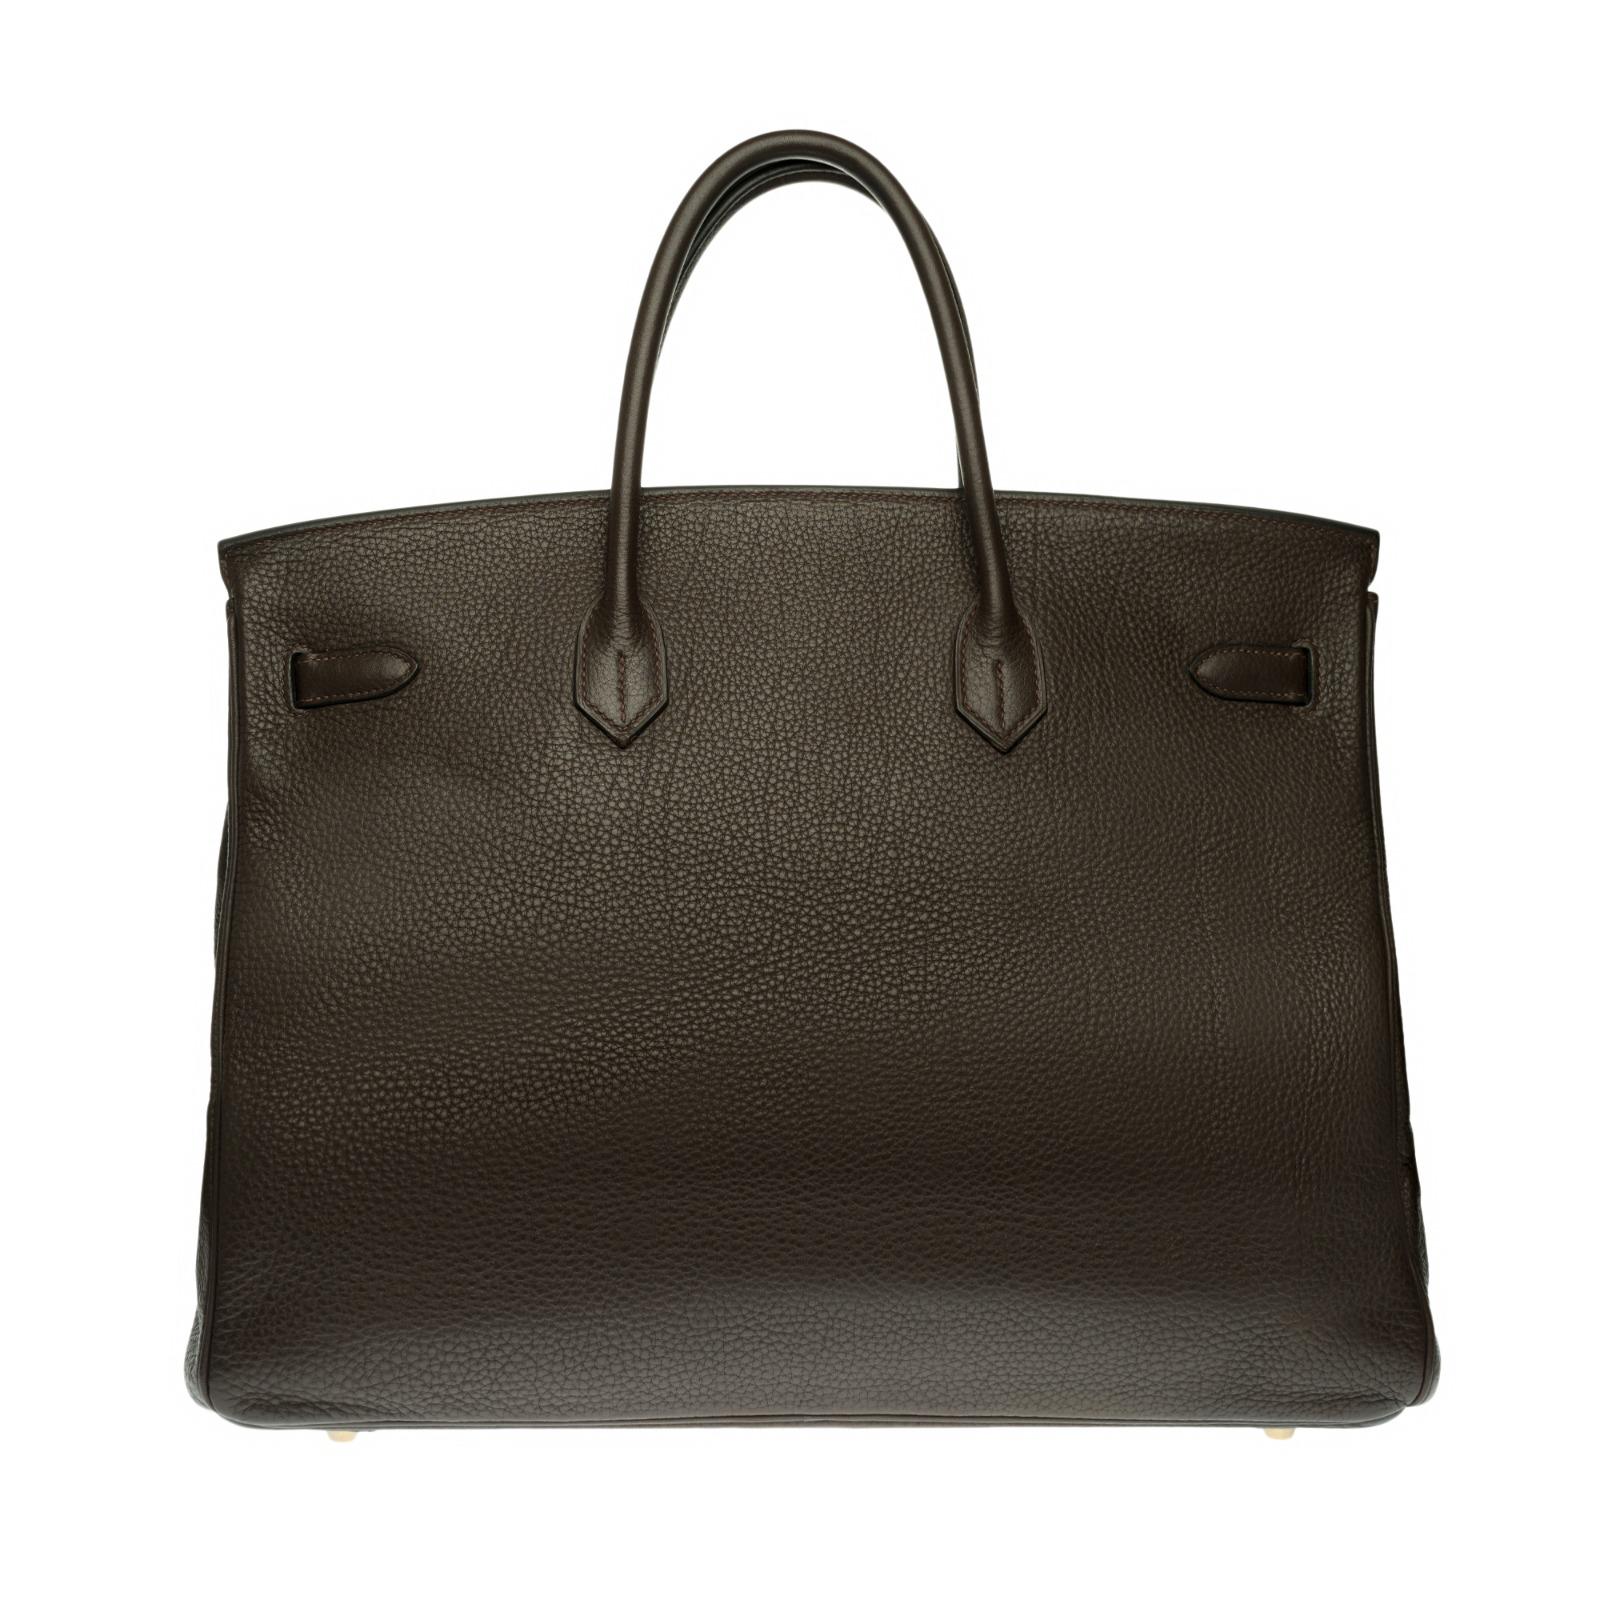 Spacious Hermes Birkin 40 cm in brown togo leather handbag, gold-plated metal hardware (brand new), double brown leather handle allowing a handheld.
Closure by flap.
Lining in brown leather, a zipped pocket, a patch pocket.
Signature: 